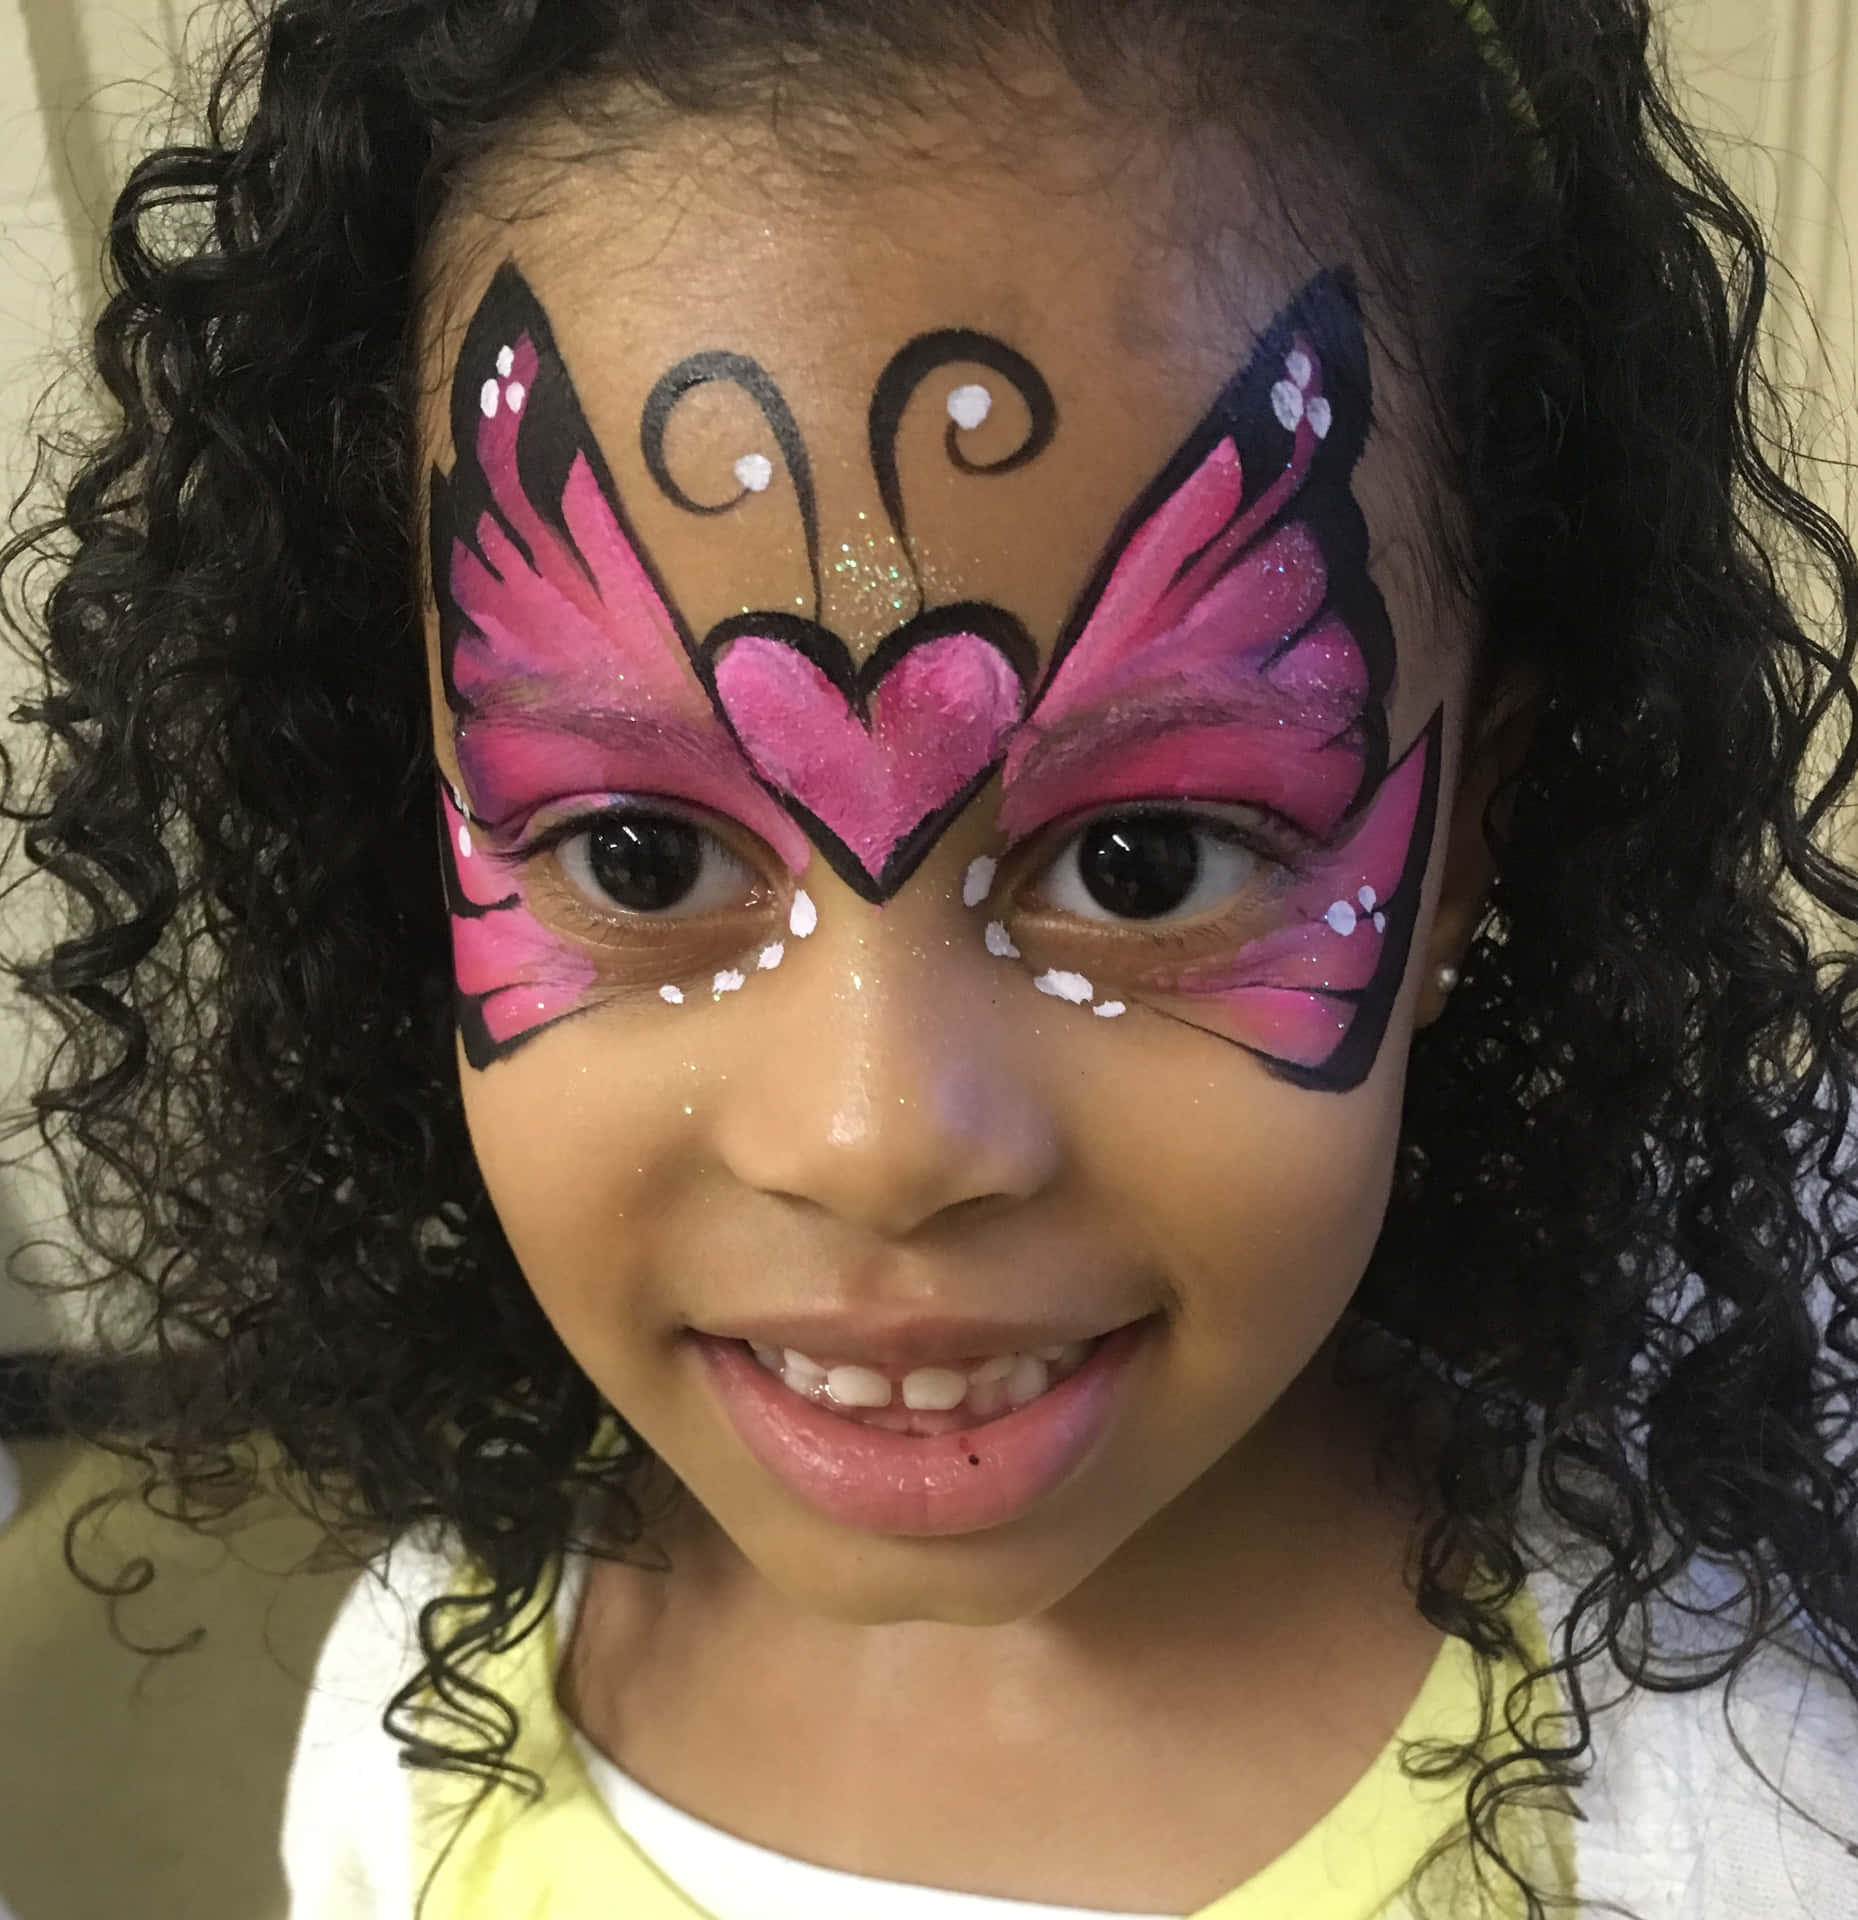 "This simple and vibrant butterfly face painting brings color and joy to your special occasion." Wallpaper